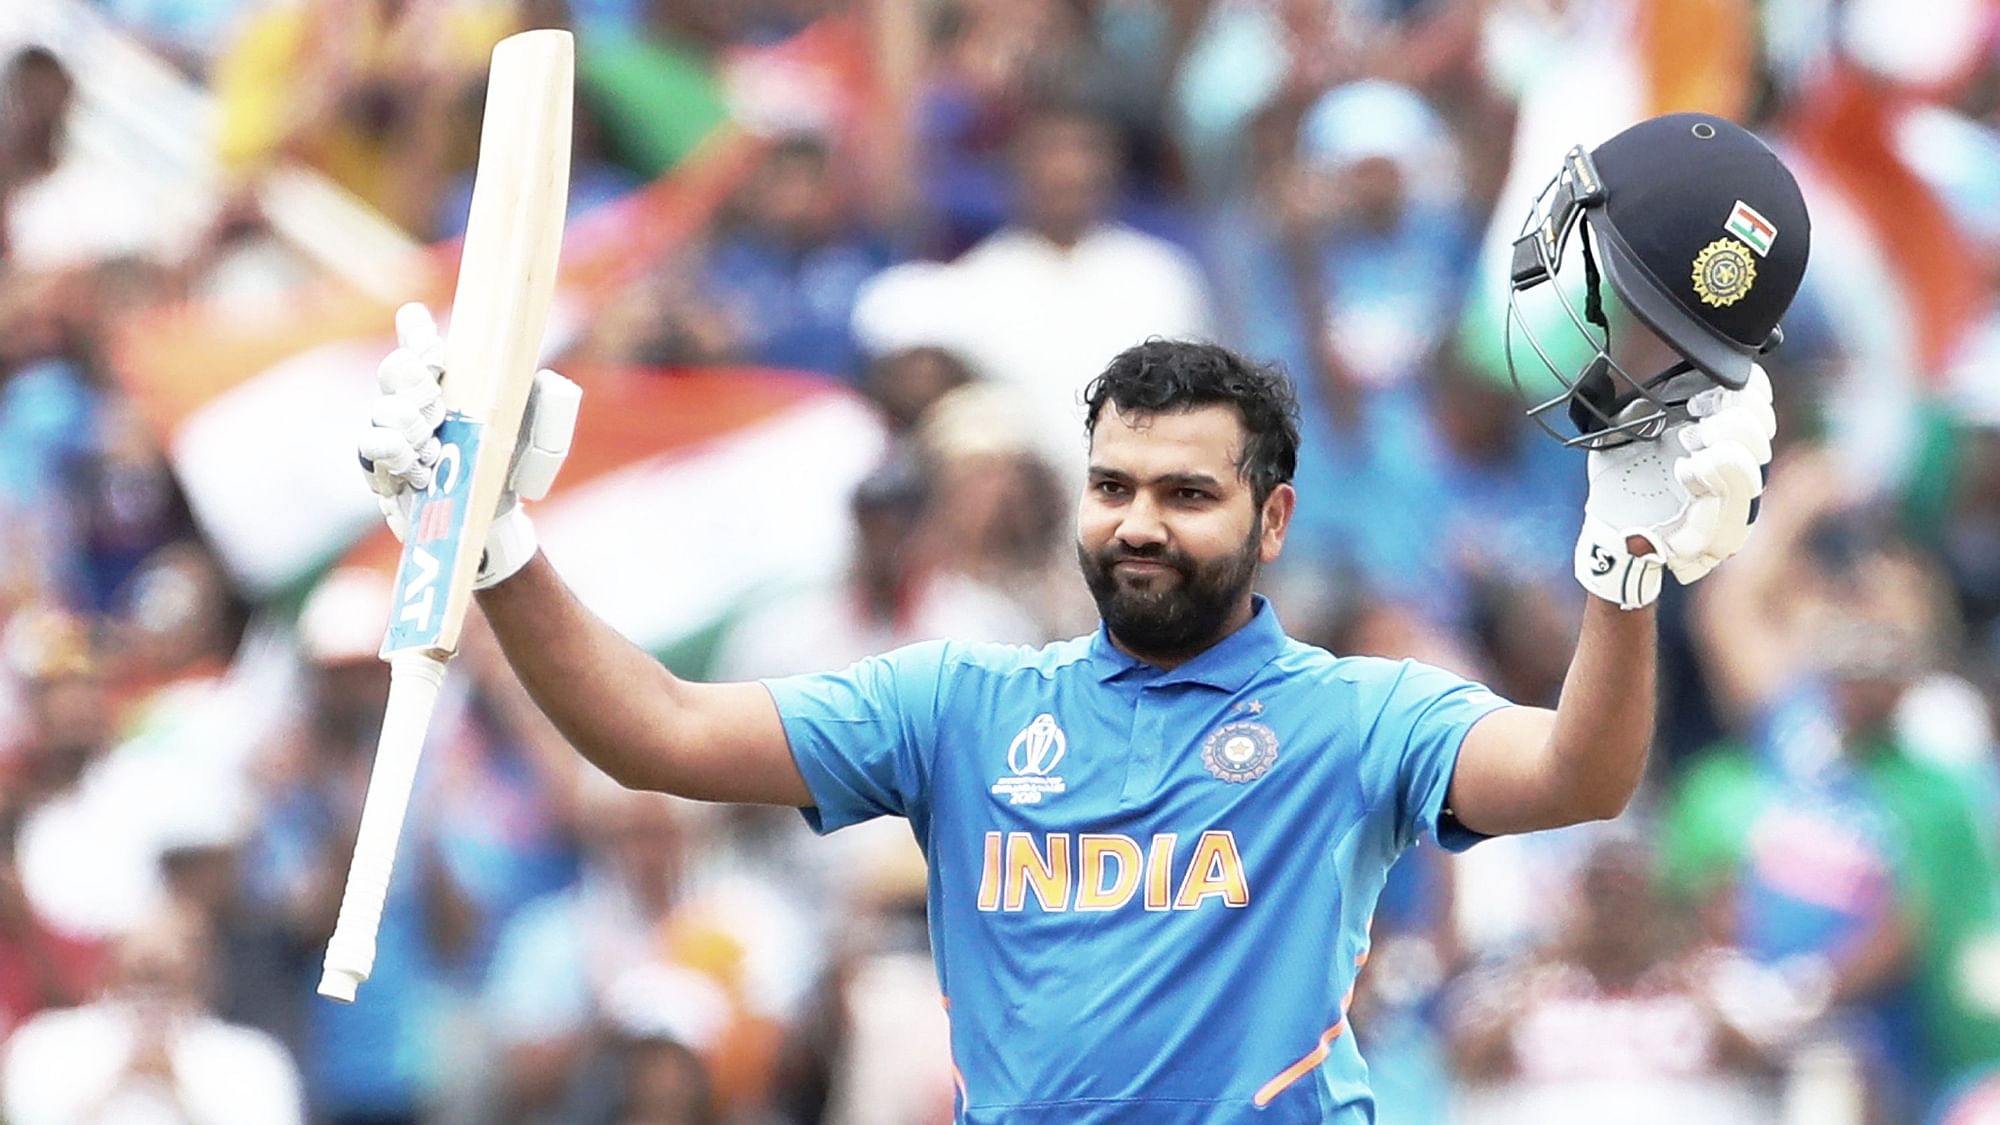 India’s Rohit Sharma raises his bat and helmet to celebrate scoring a century during the Cricket World Cup match.